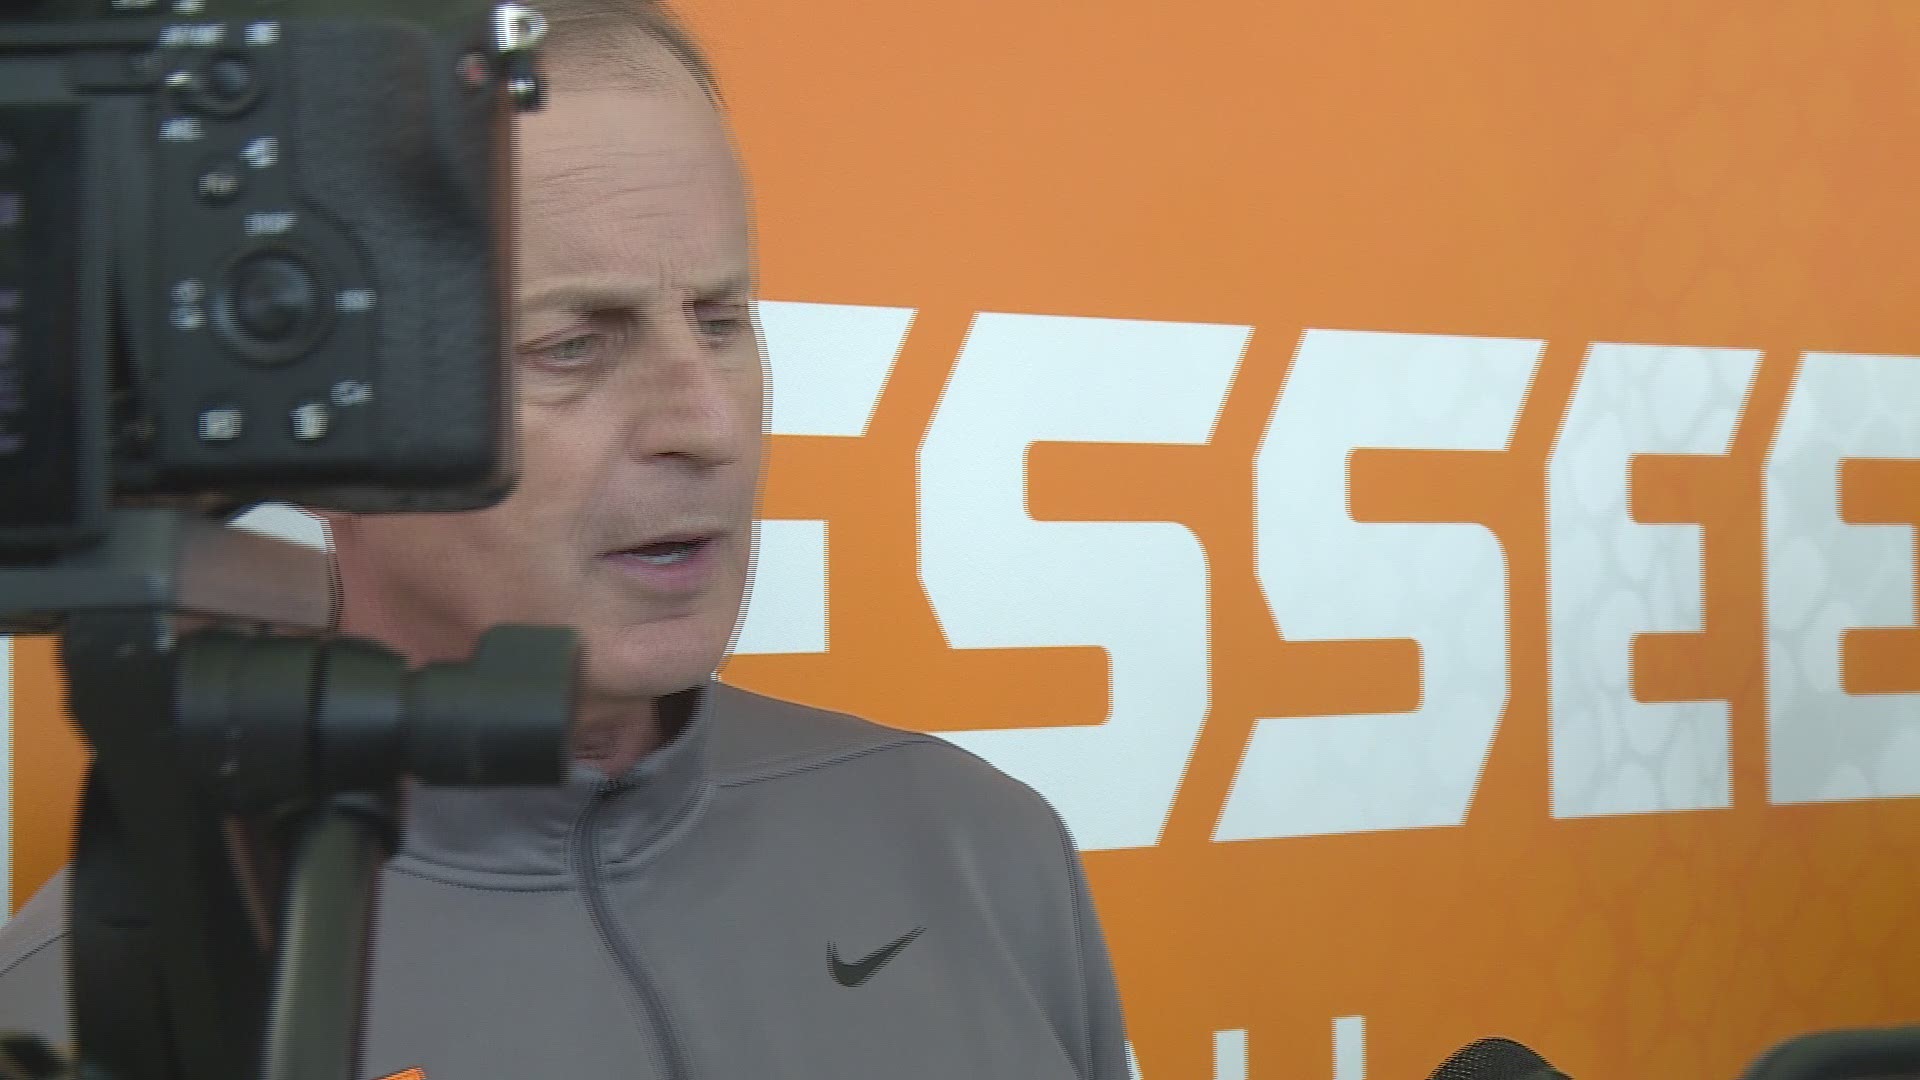 Barnes talks to the media ahead of top-ranked Tennessee's game against Texas A&M. With a victory, the Vols extend their winning streak to 16 games, making program history.